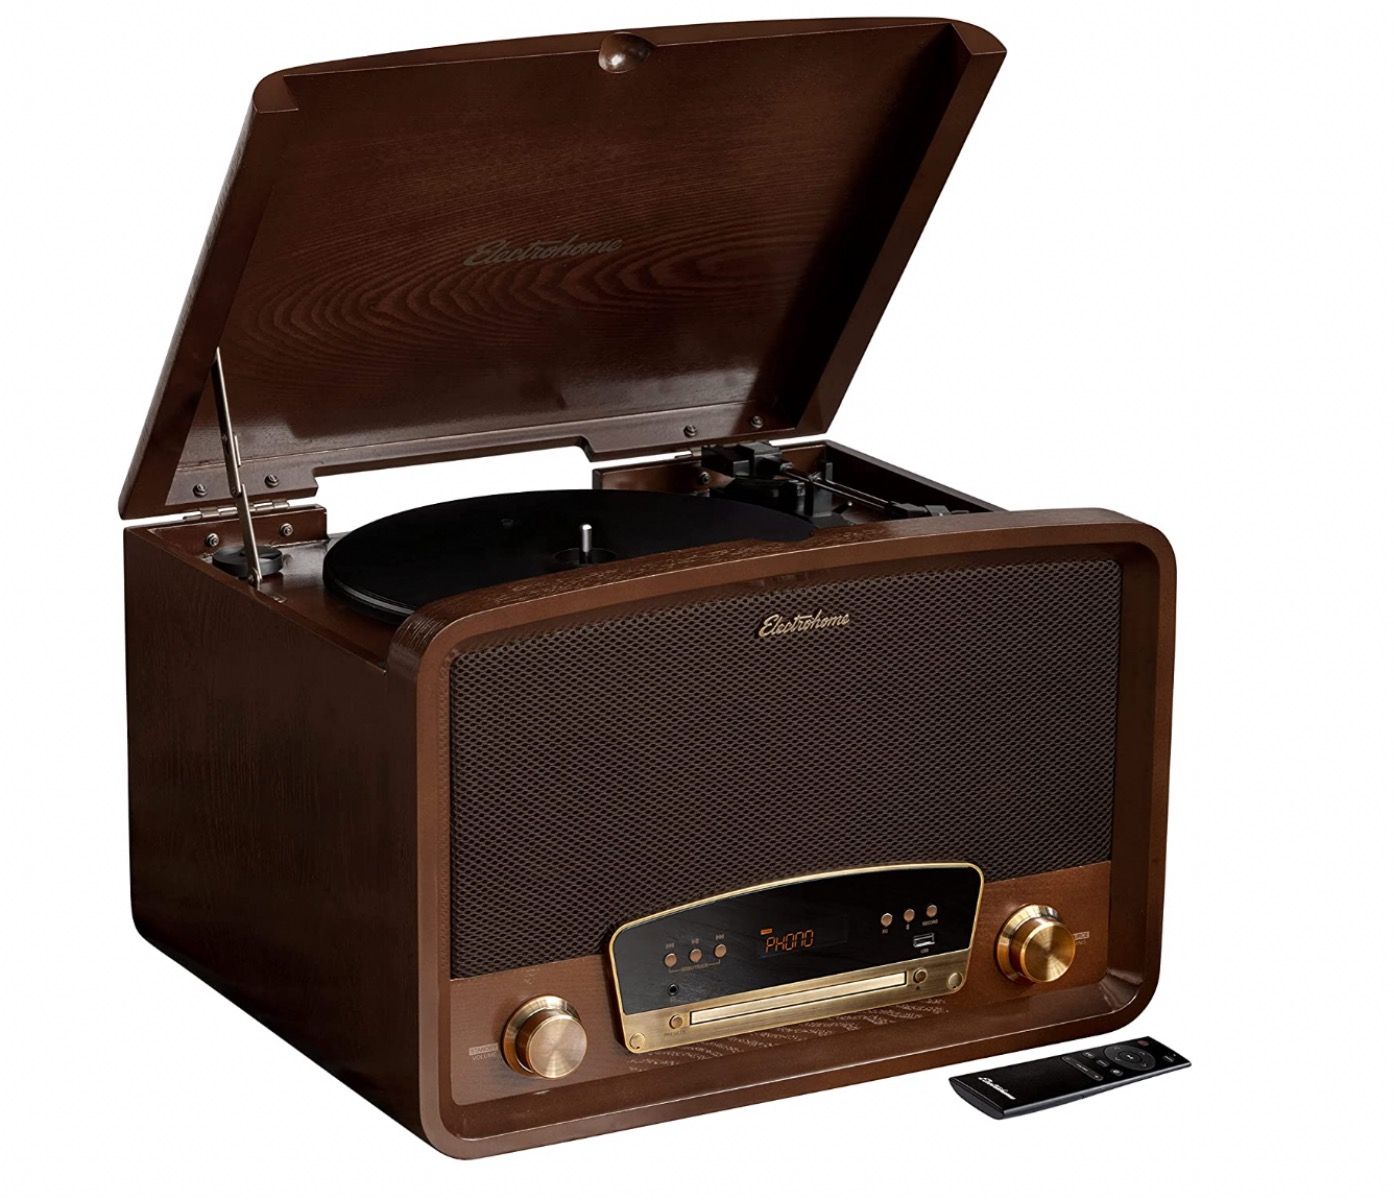 Full shot of the walnut colored Electrophome Kingston 7-in-One record player with lid up